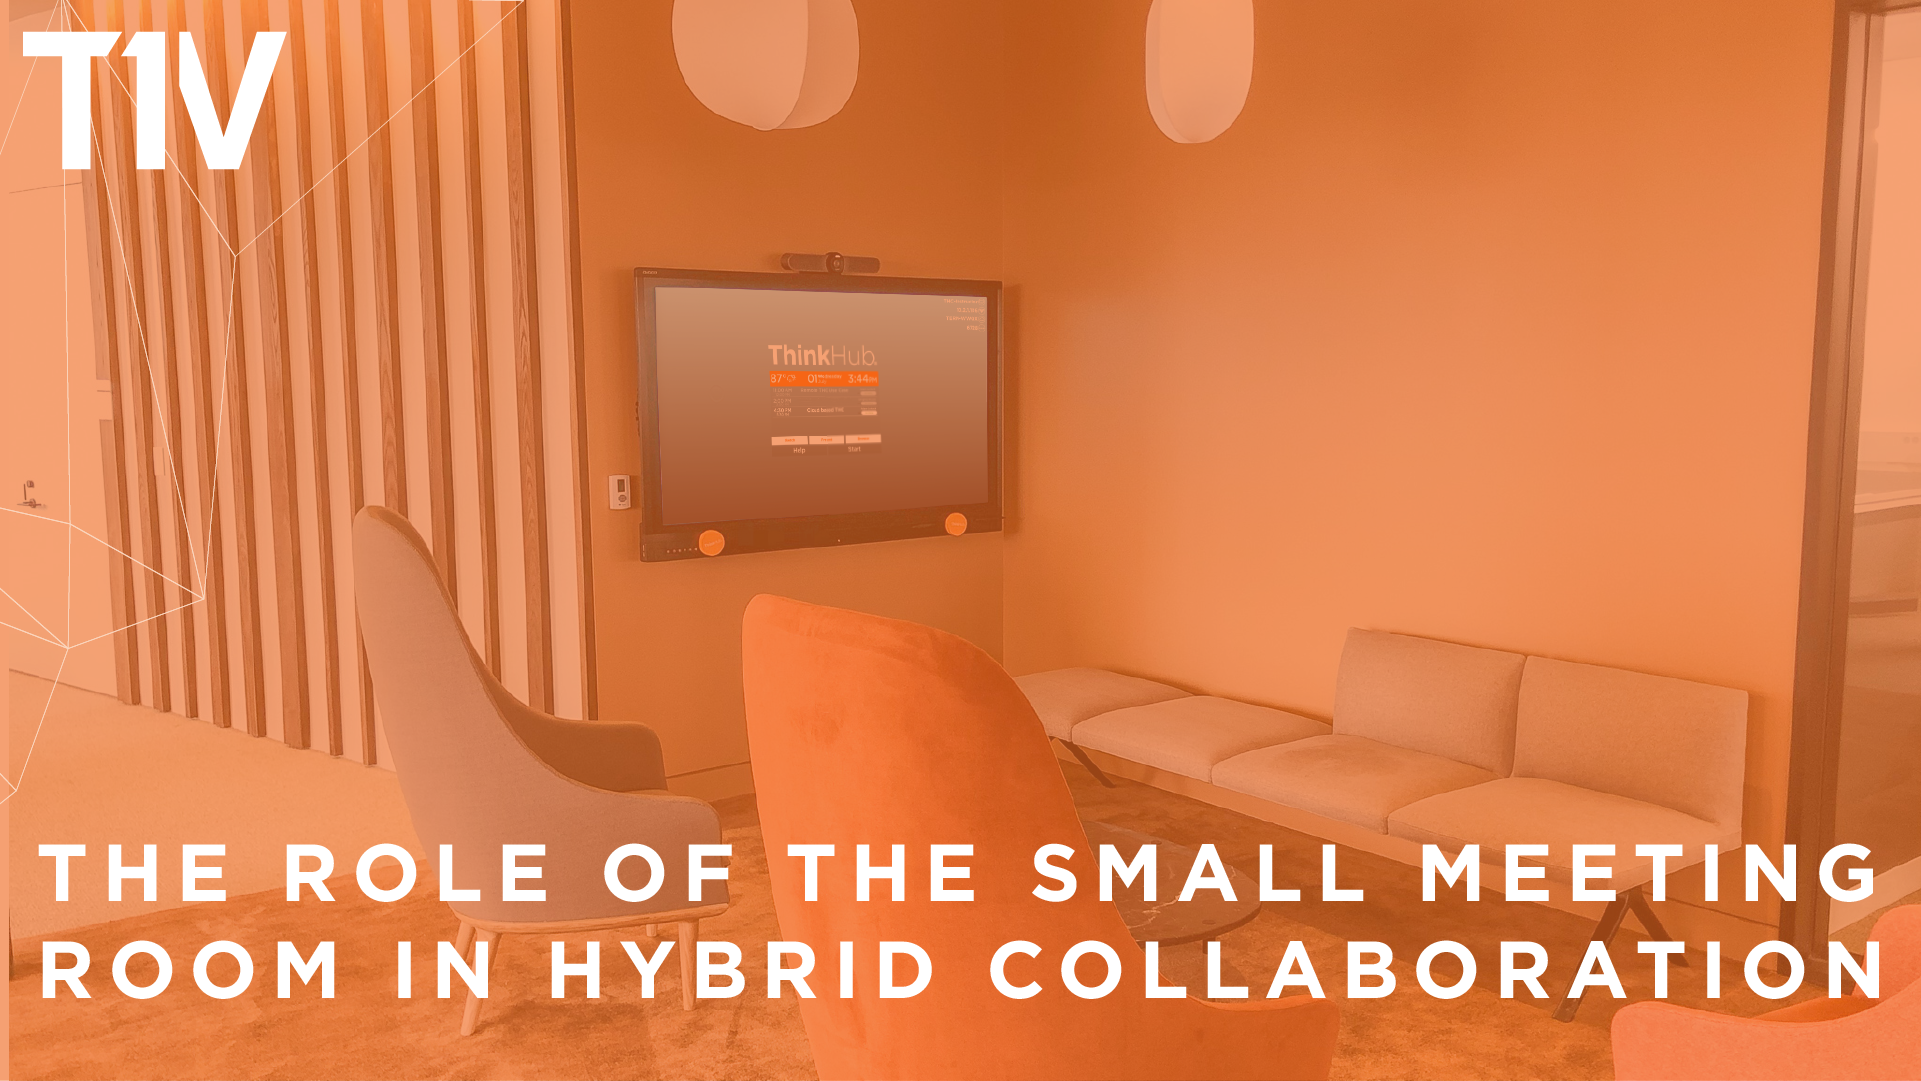 t1v-the-role-of-the-small-meeting-room-in-hybrid-collaboration-deck-cover-49